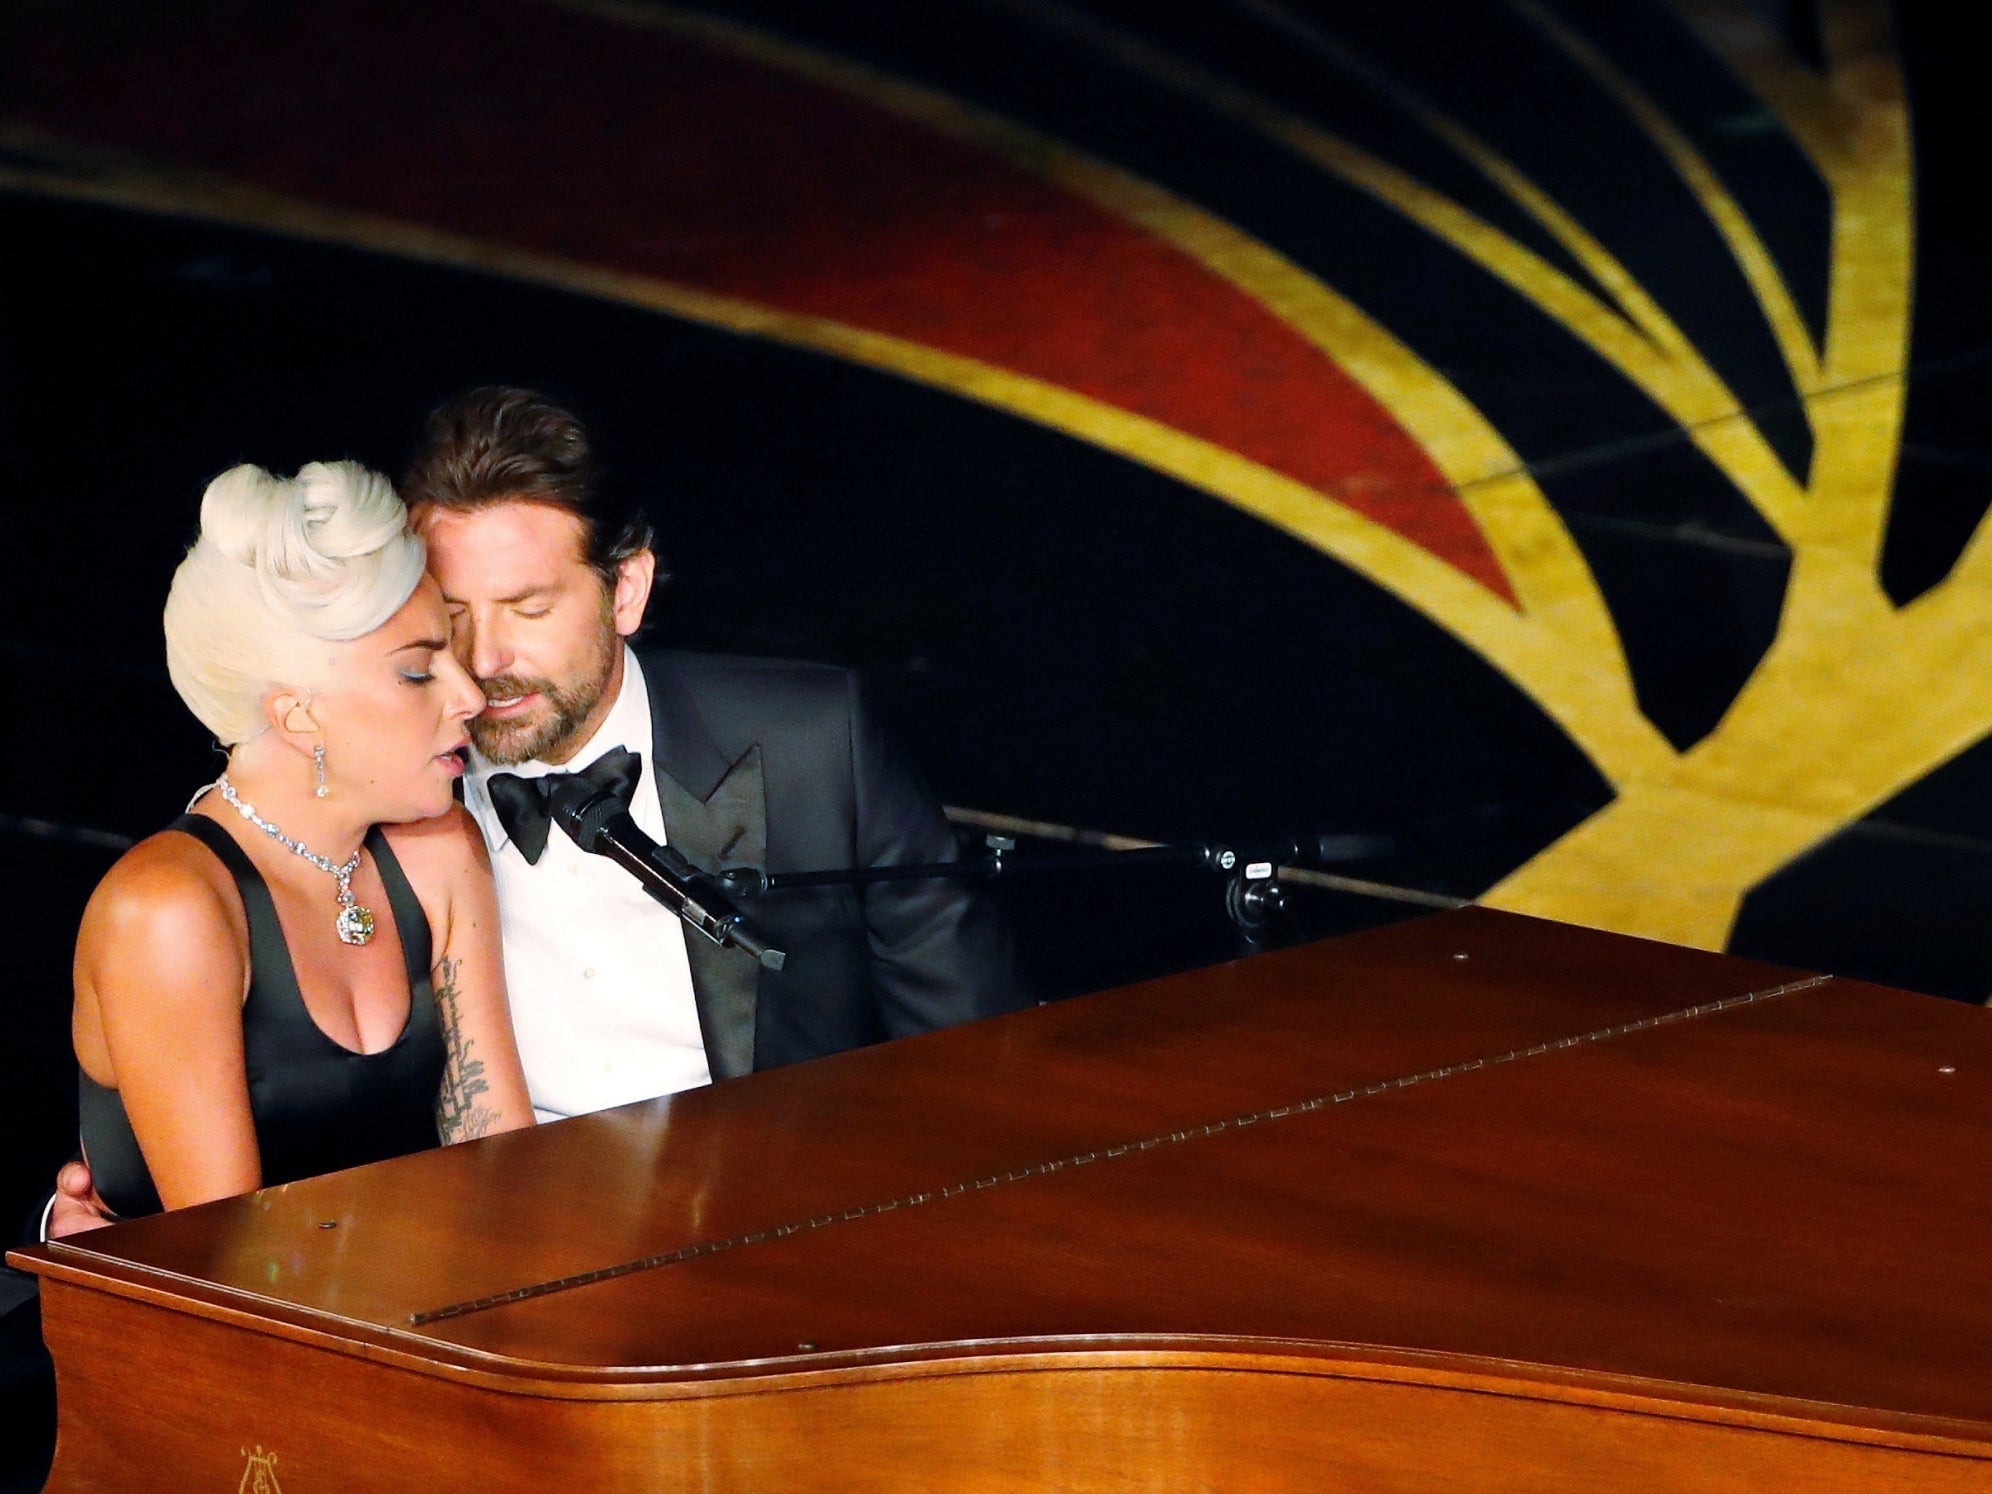 Bradley Cooper performs with Lady Gaga at the 2019 Oscars